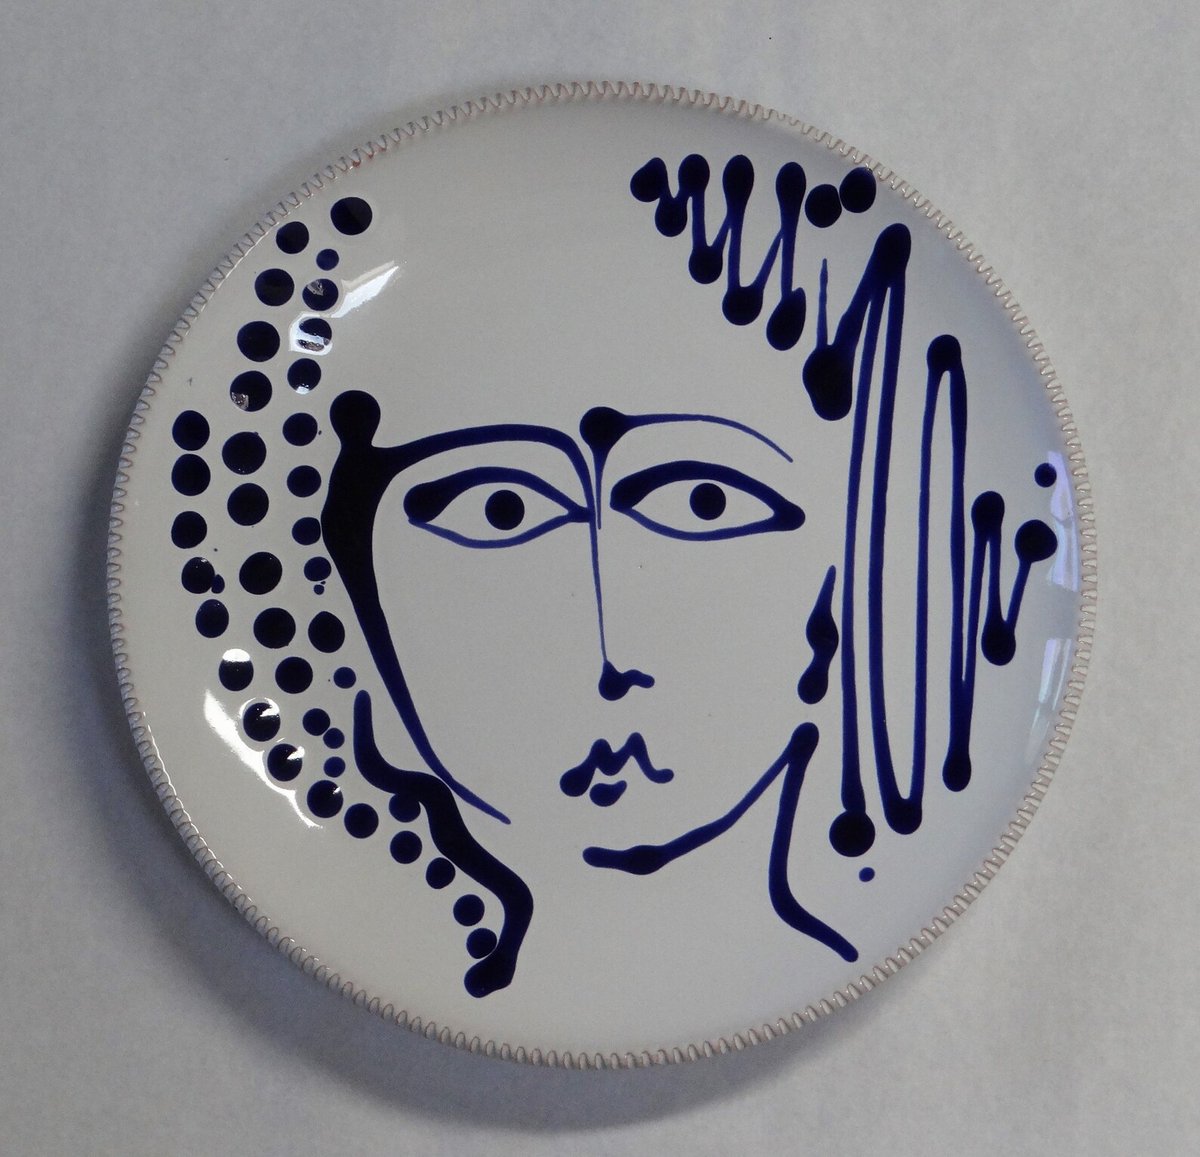 Plate decorated with a woman's face, Italian ceramics #handmade #pottery #Italy #Collectible #plate #decor #home #homedecor #interiors #shopsmall #supportsmallbusiness #womaninbizhour #vintage #vintageculture  #vintage4sale #gifts elementsdeco.etsy.com

 etsy.me/44yiJXL